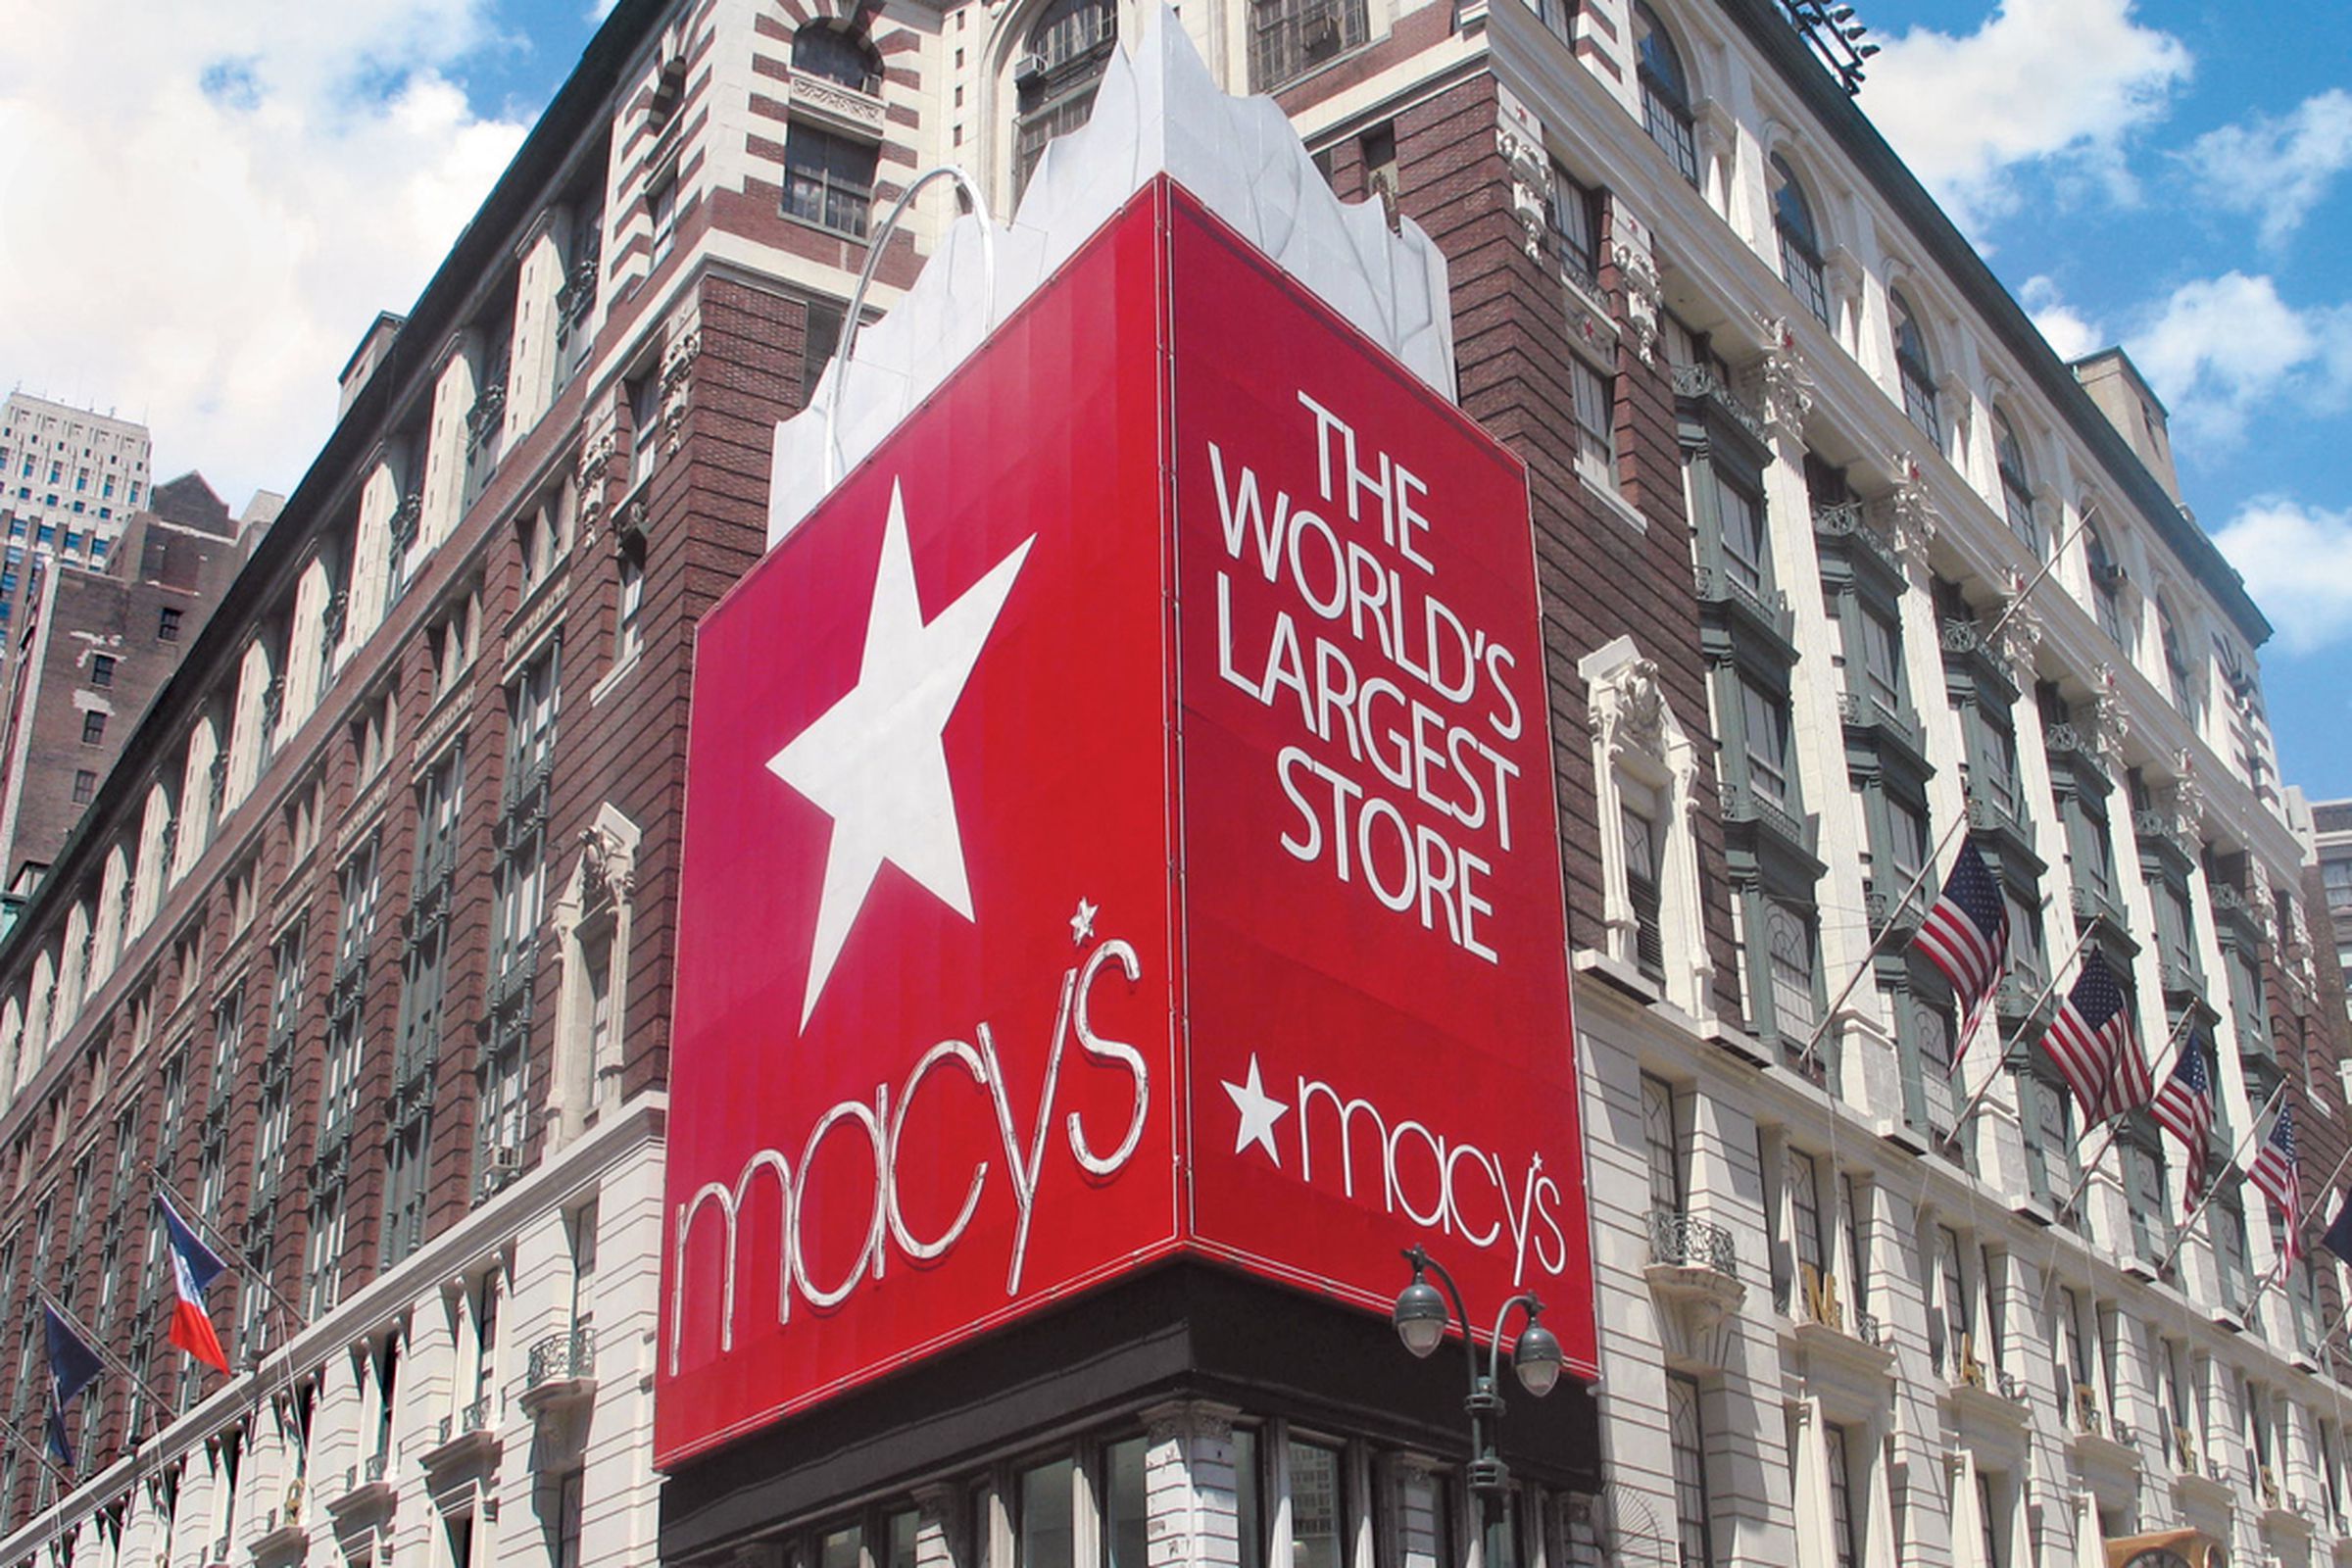 macy's herald square (from MACY'S)